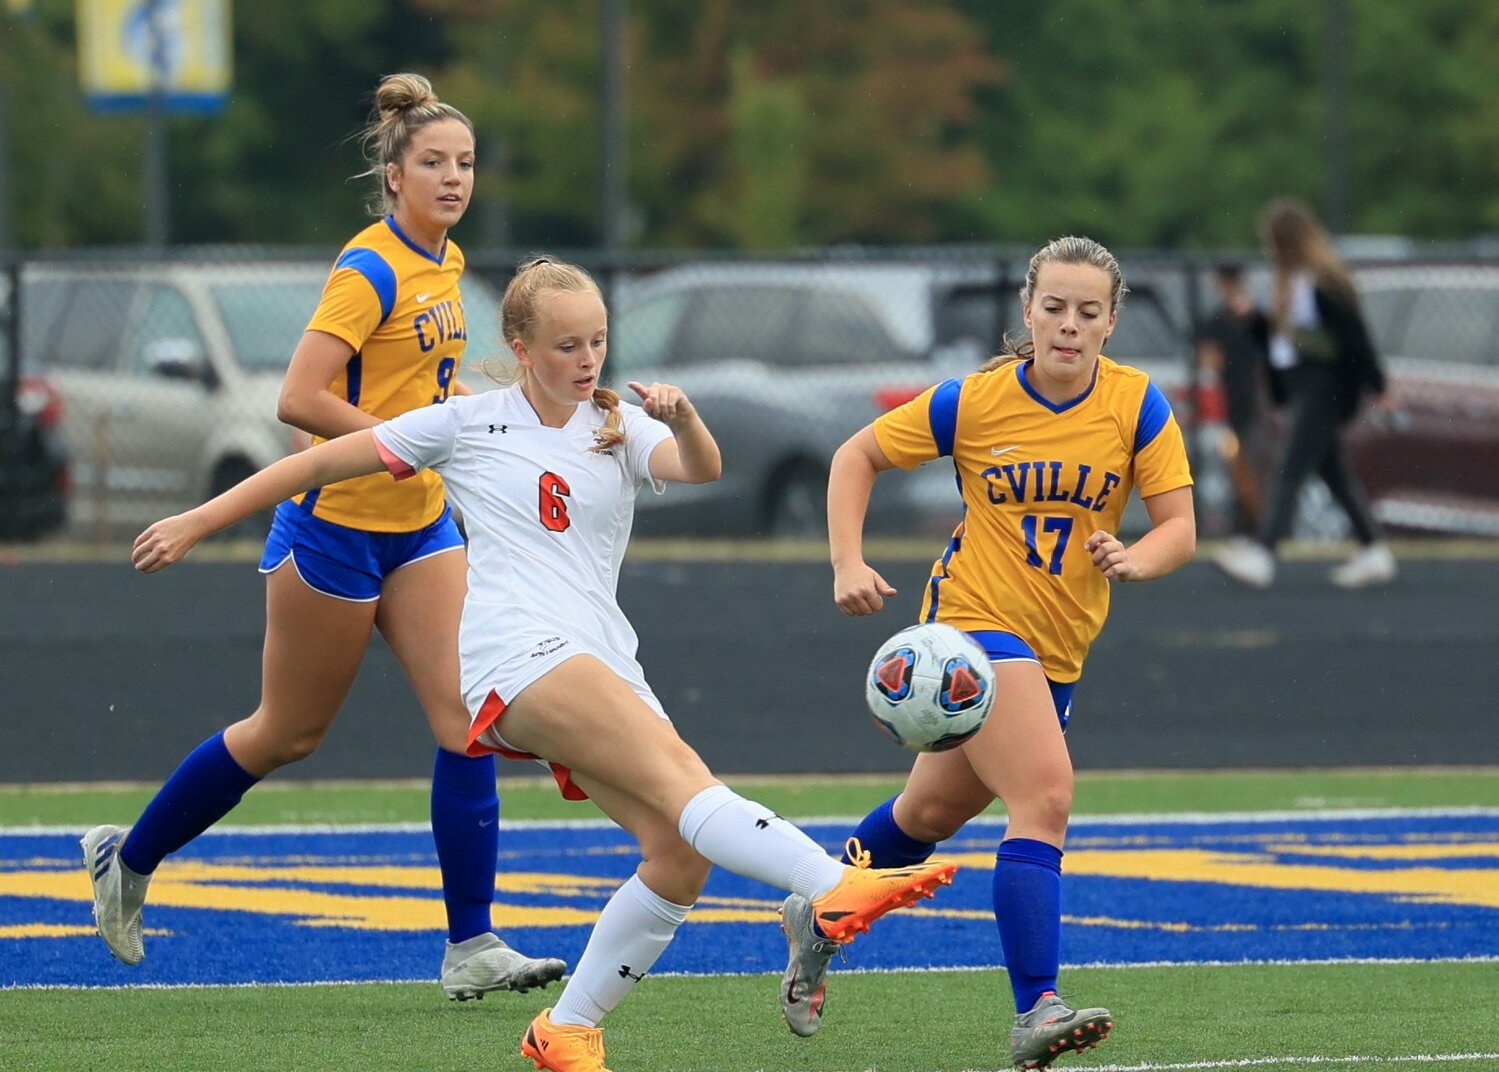 North Montgomery's Ava Nunan fires a ball downfield for the Chargers.